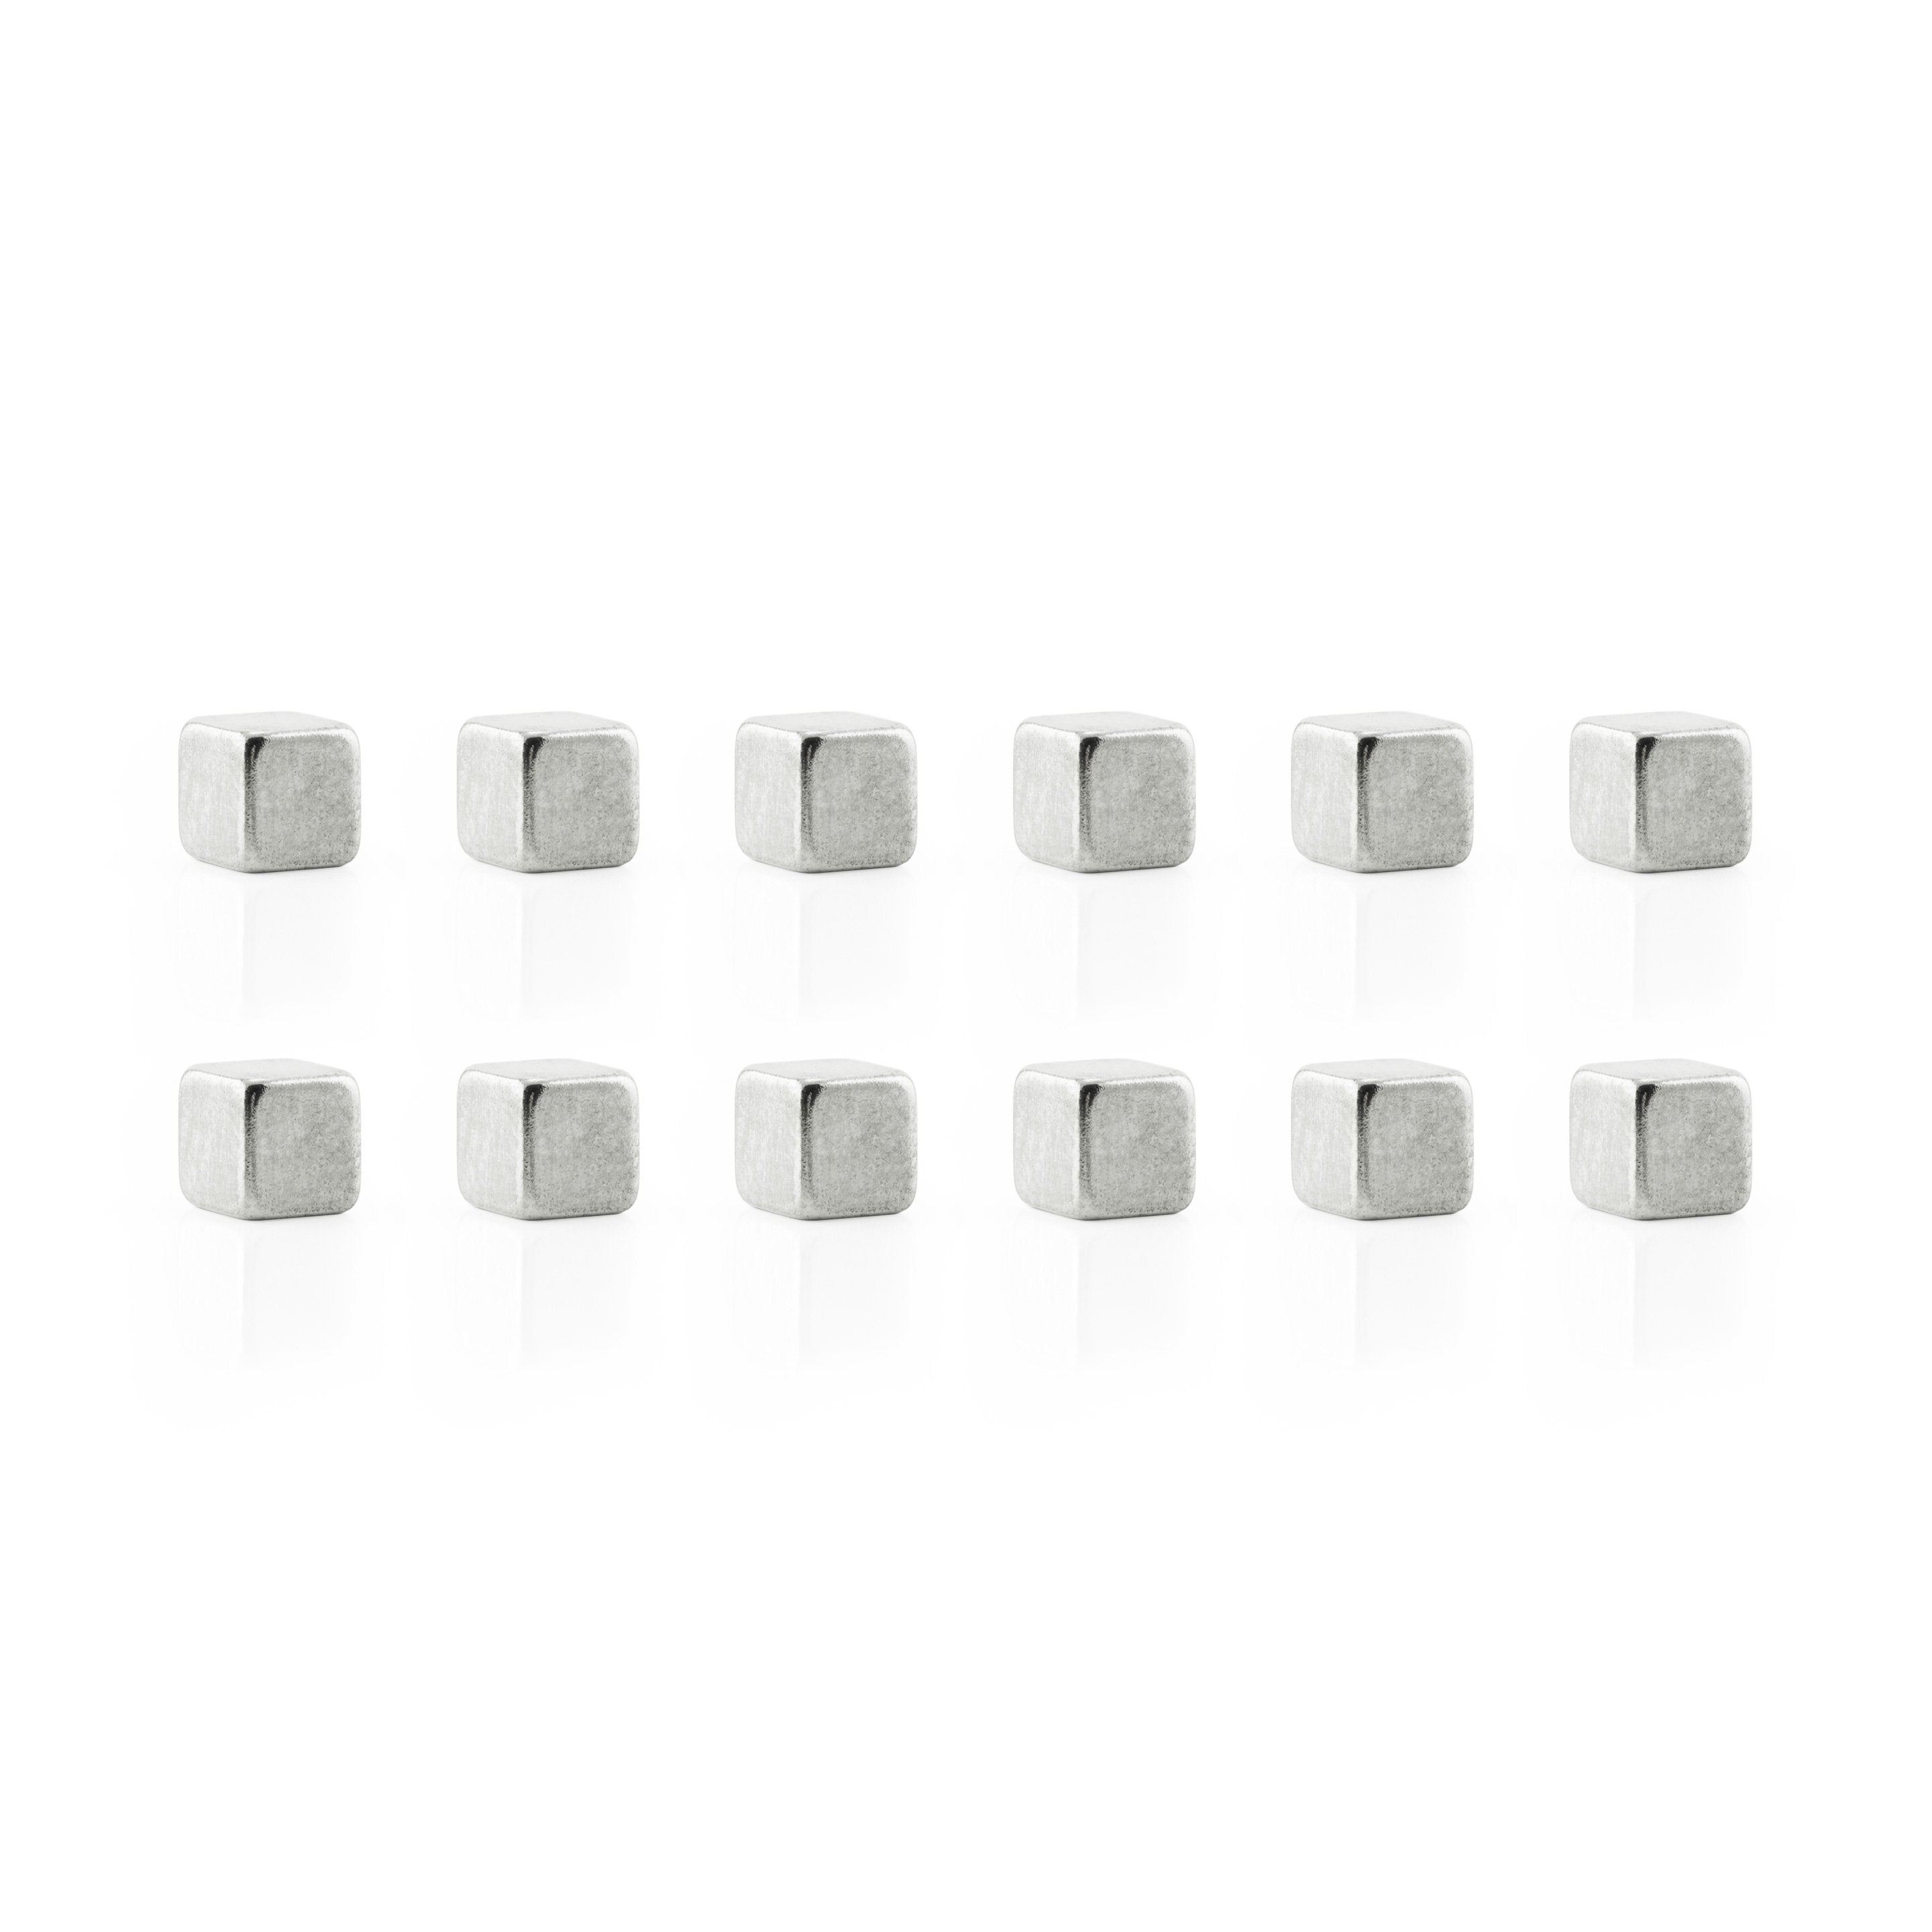 Three by Three Mighties Magnets, Golden (16-Pack) 20205 - The Home